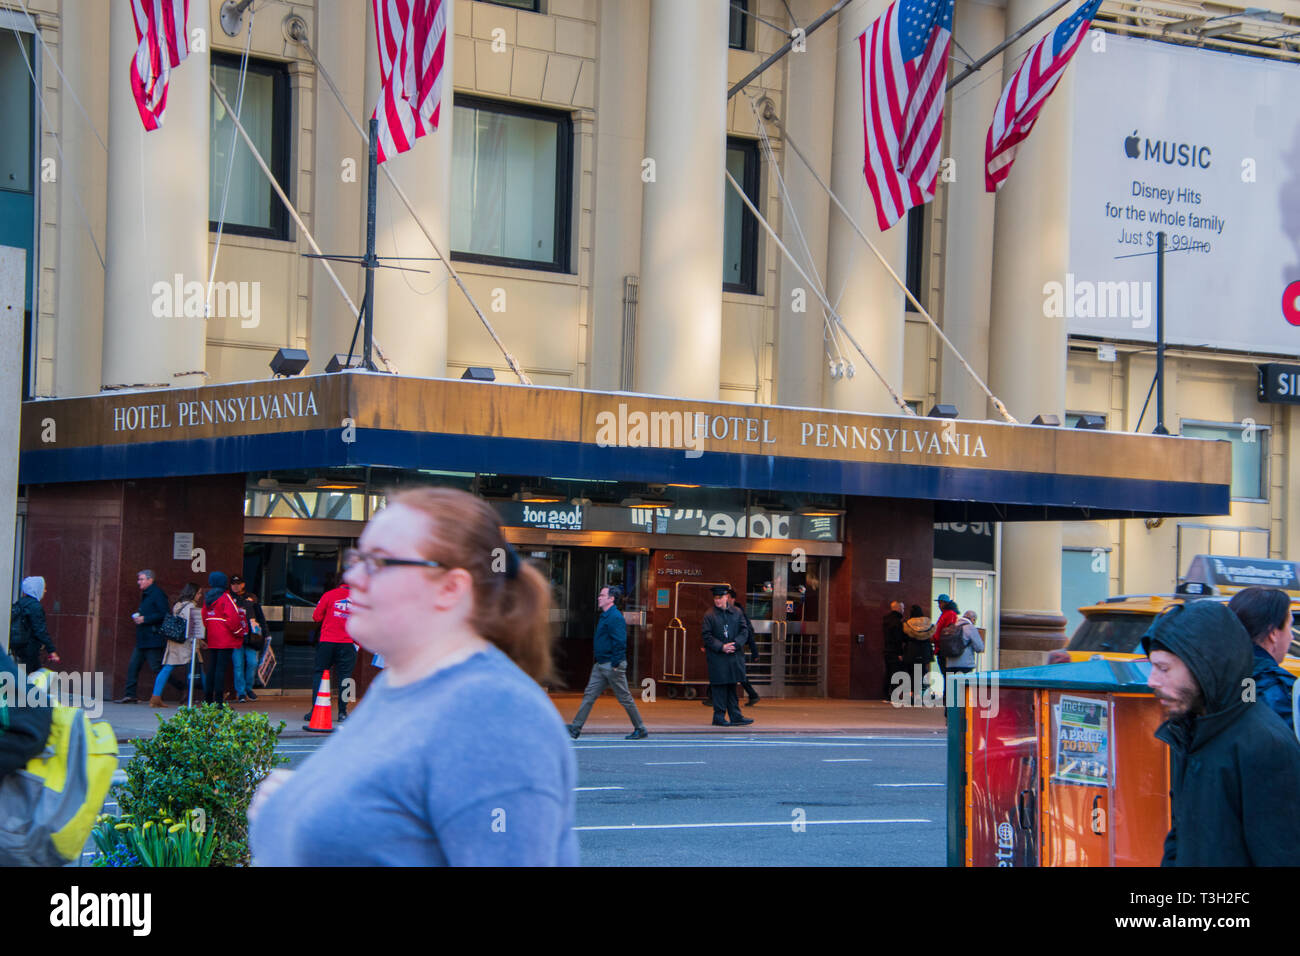 New York, NY - April 3, 2019: Front entrance and marquee of The Hotel Pennsylvania in Manhattan, New York City with the doorman in front and pedestria Stock Photo